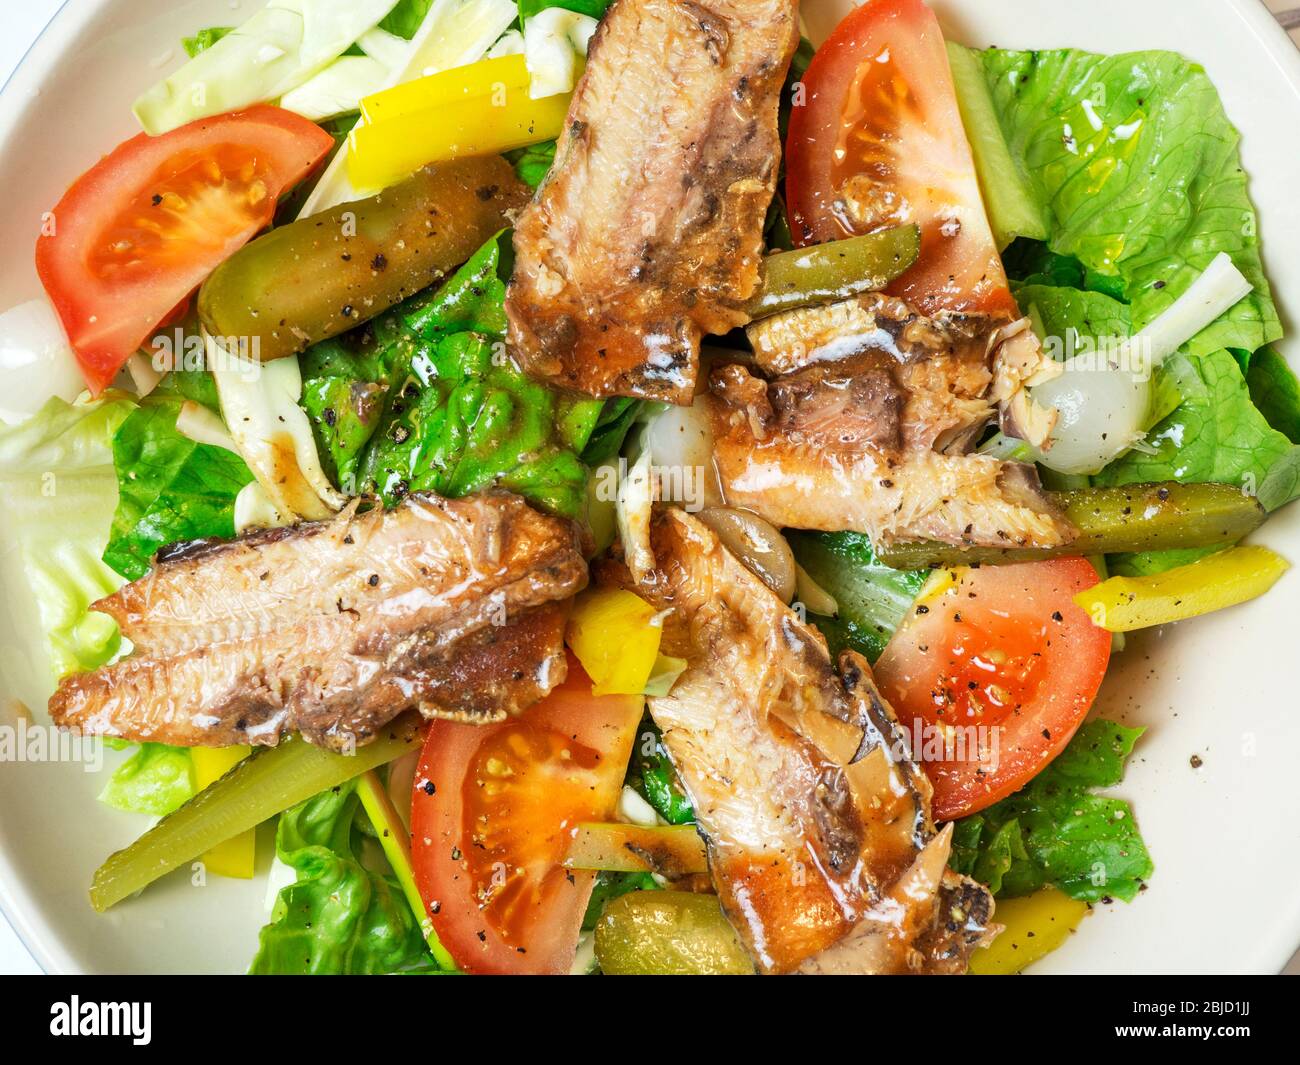 Bowl of dressed salad with tinned pilchards lettuce tomatoes yellow peppers sliced gherkins and onions Stock Photo